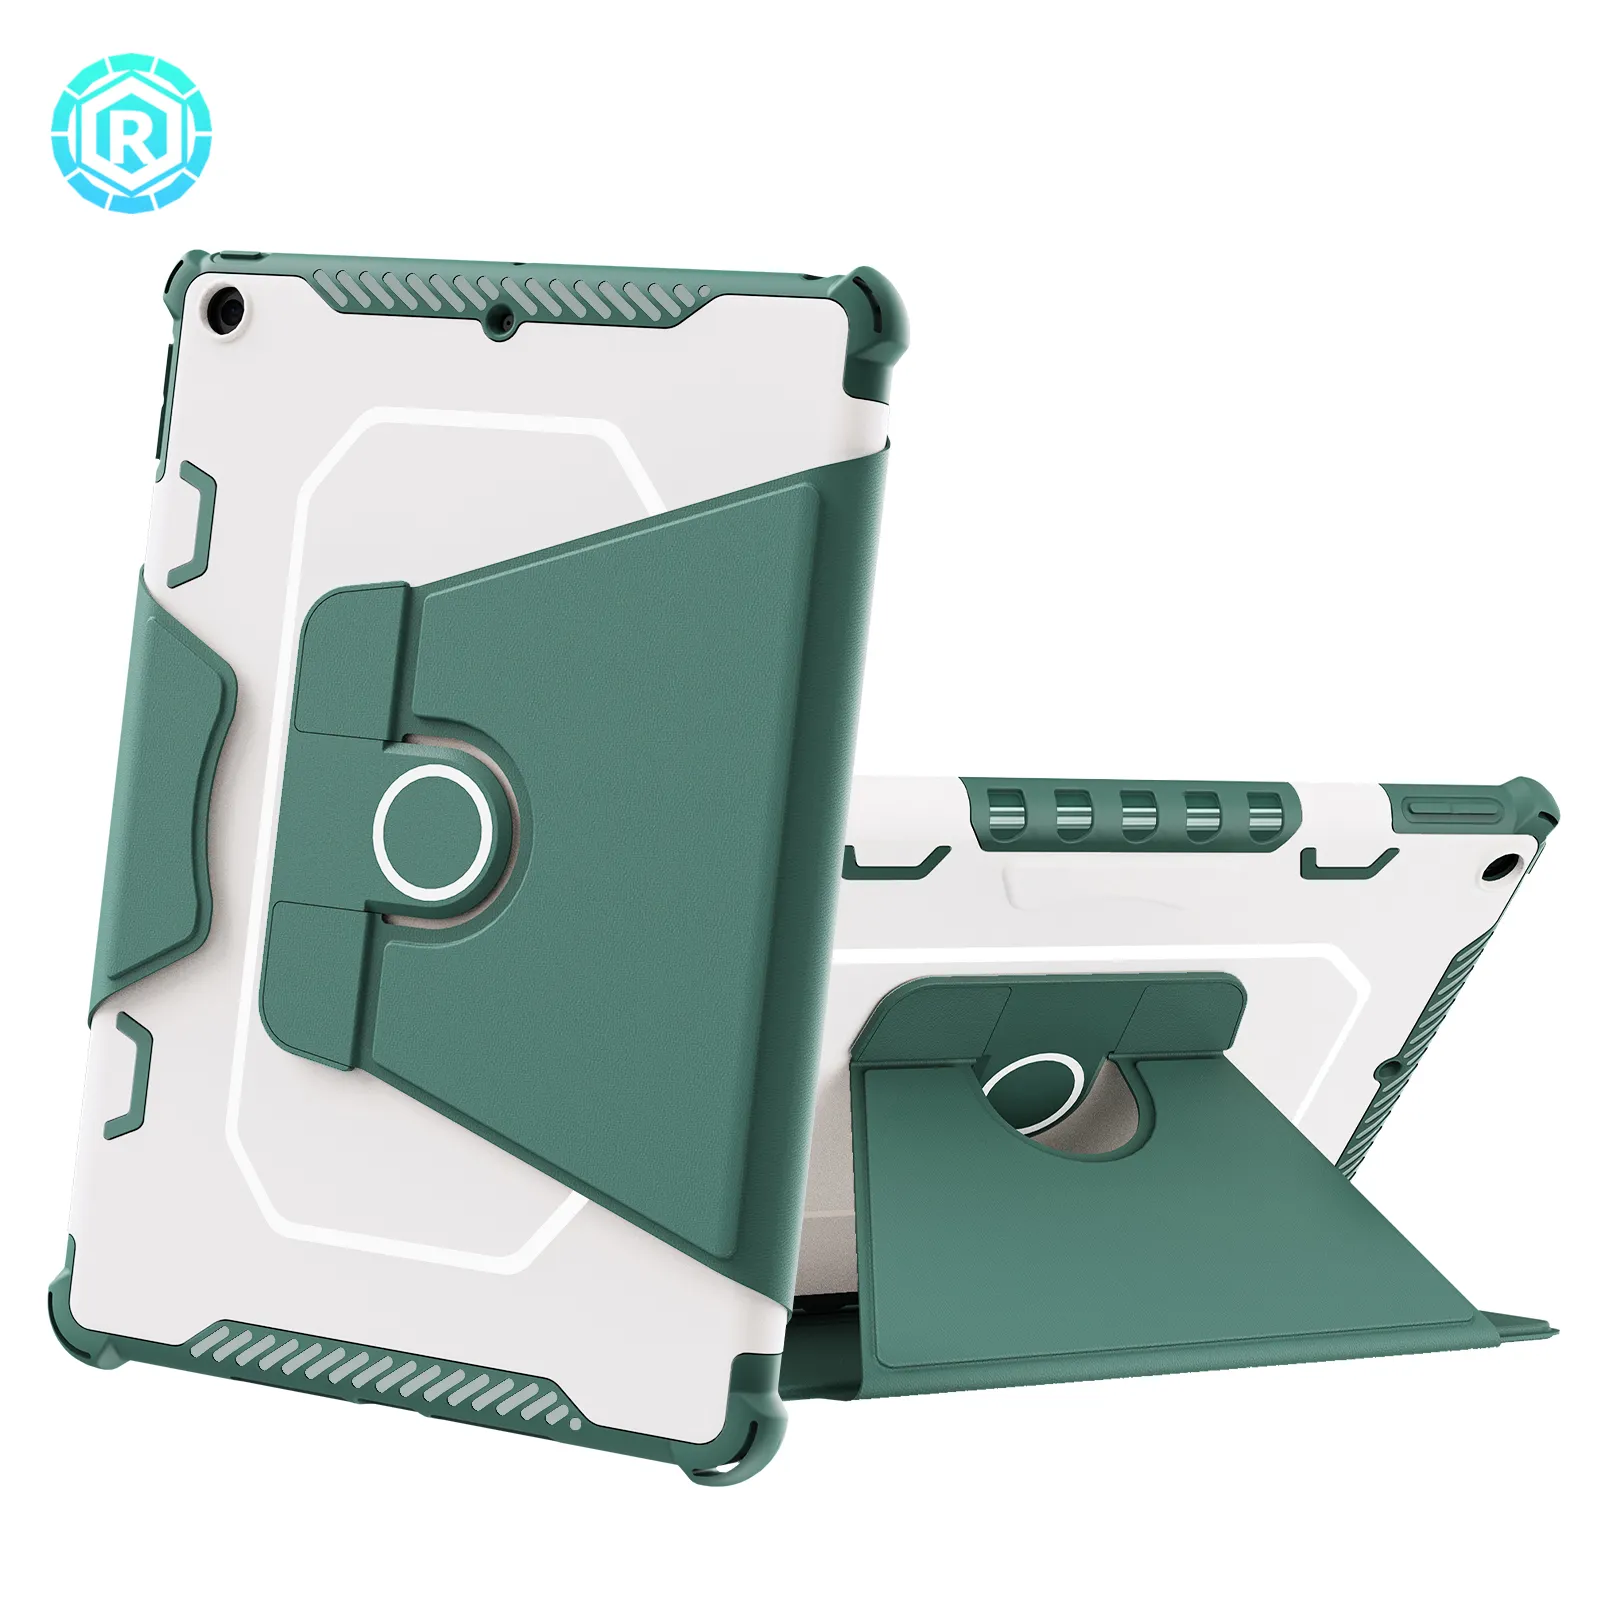 Hot Selling Cover For IPad Case 10.2 Inch Shockproof Sturdy Cover With 360 Rotating Stand/Pencil Holder